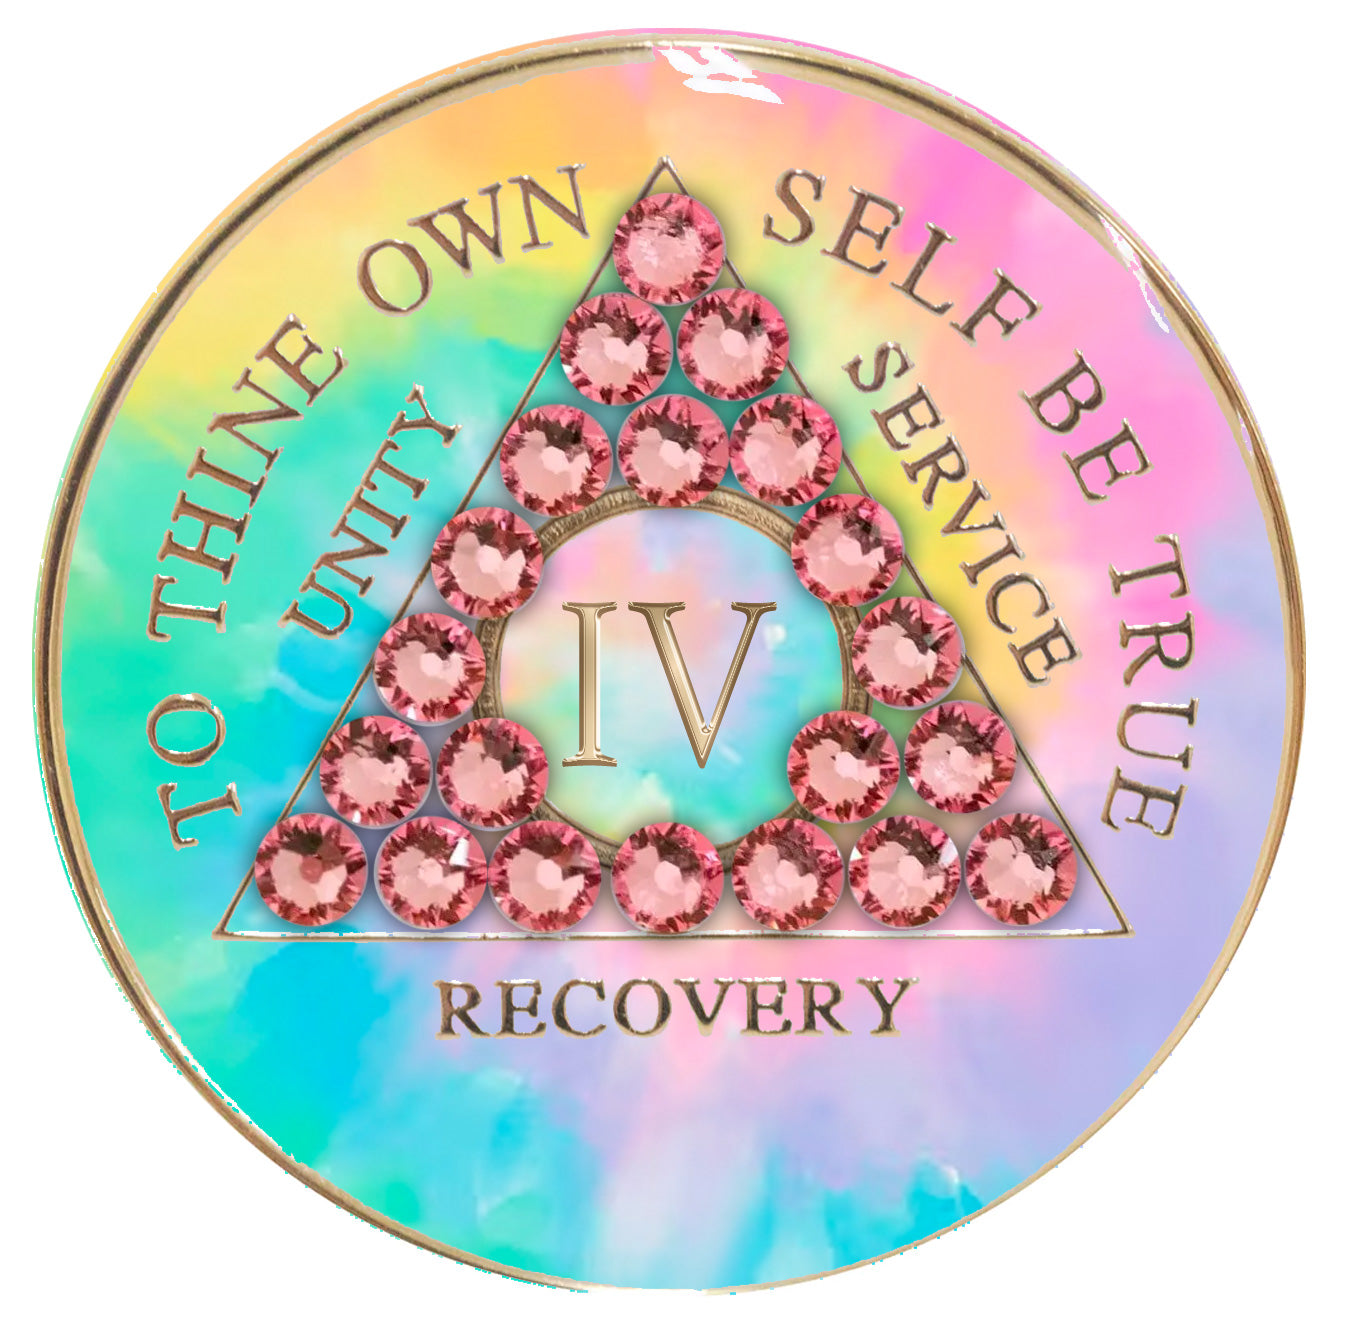 4 year AA medallion pastel tie-dye representing a psychic change that is needed in the recovery journey, with twenty-one light rose genuine crystals, pink, blue, yellow, and green, in the shape of the triangle, with the AA moto and roman numeral embossed in 14k gold-plated brass, the medallion is sealed with resin for a glossy, scratch free finish.